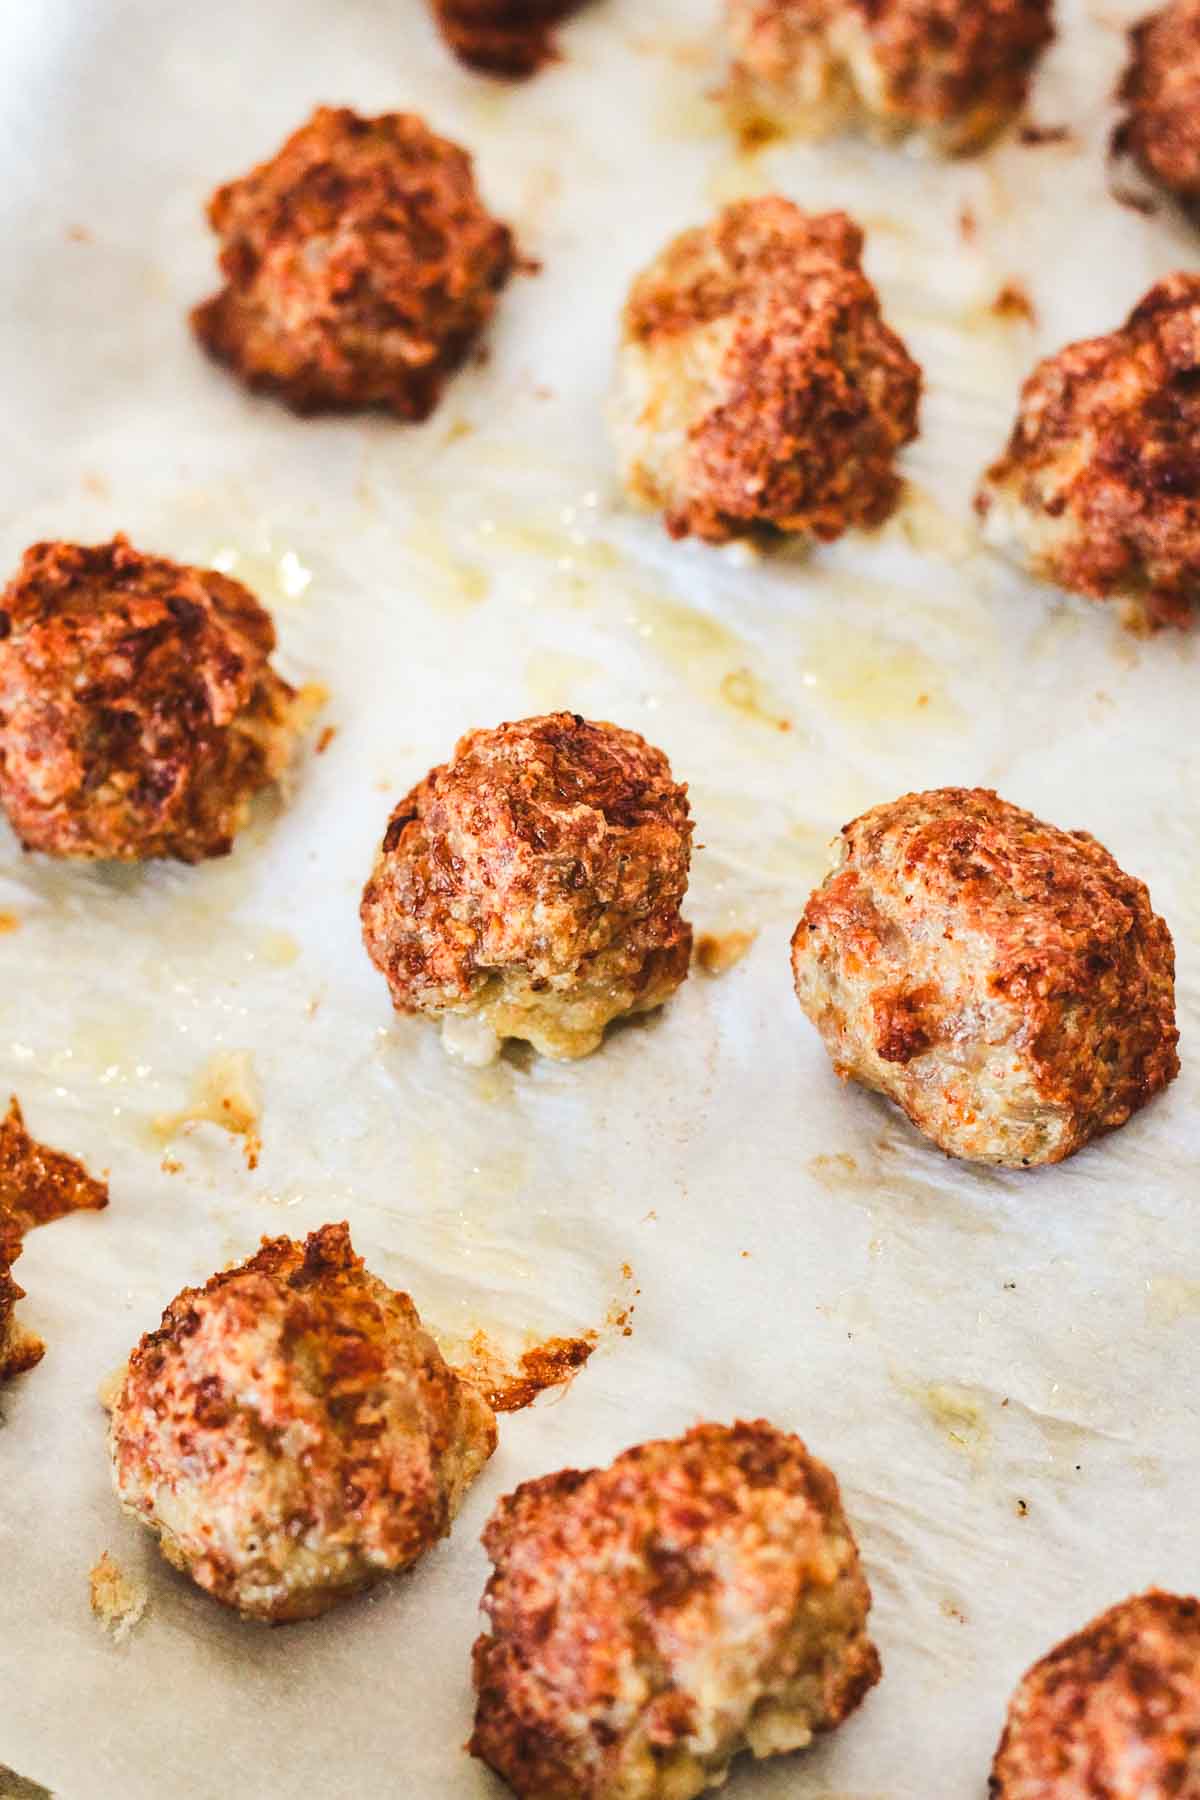 The finished baked chicken meatballs.